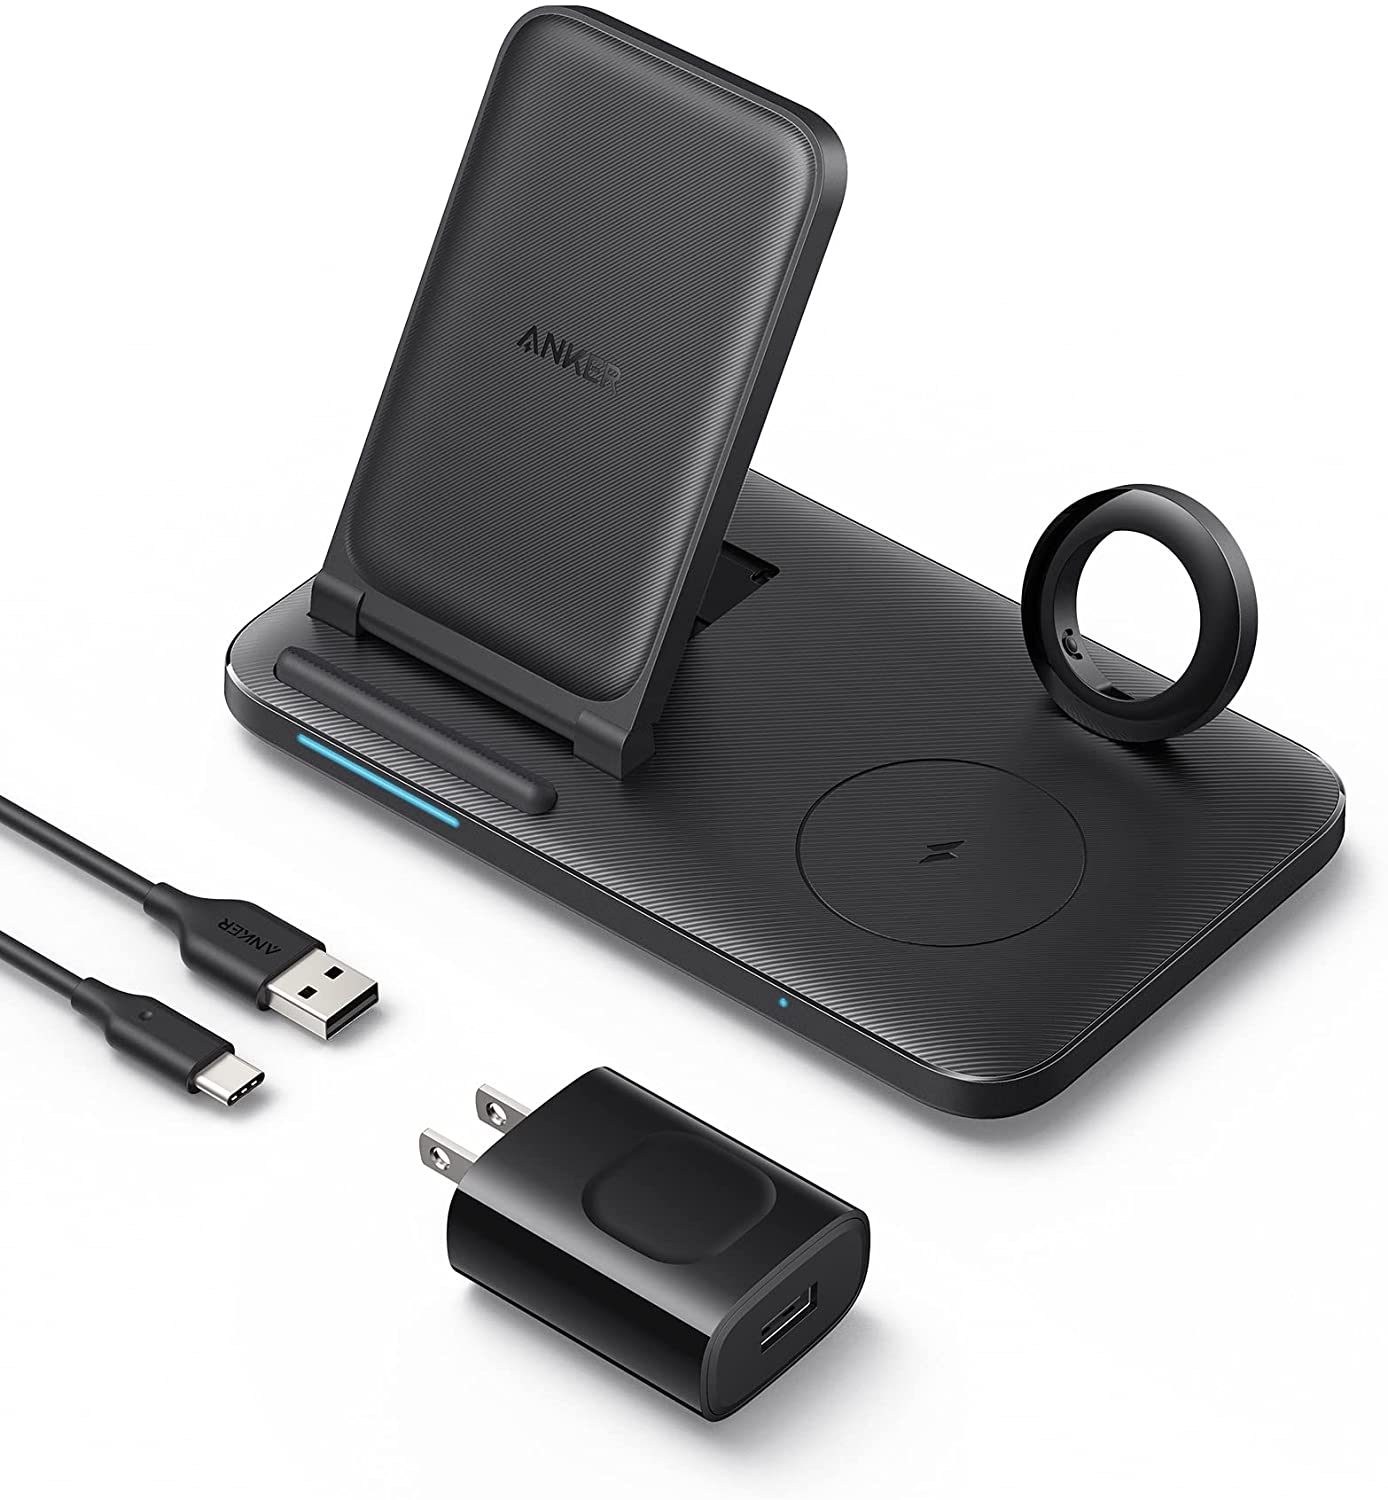 Anker 335 Wireless Charger (3-in-1 Station), Compact and Convenient Charging Station +FS $27.99